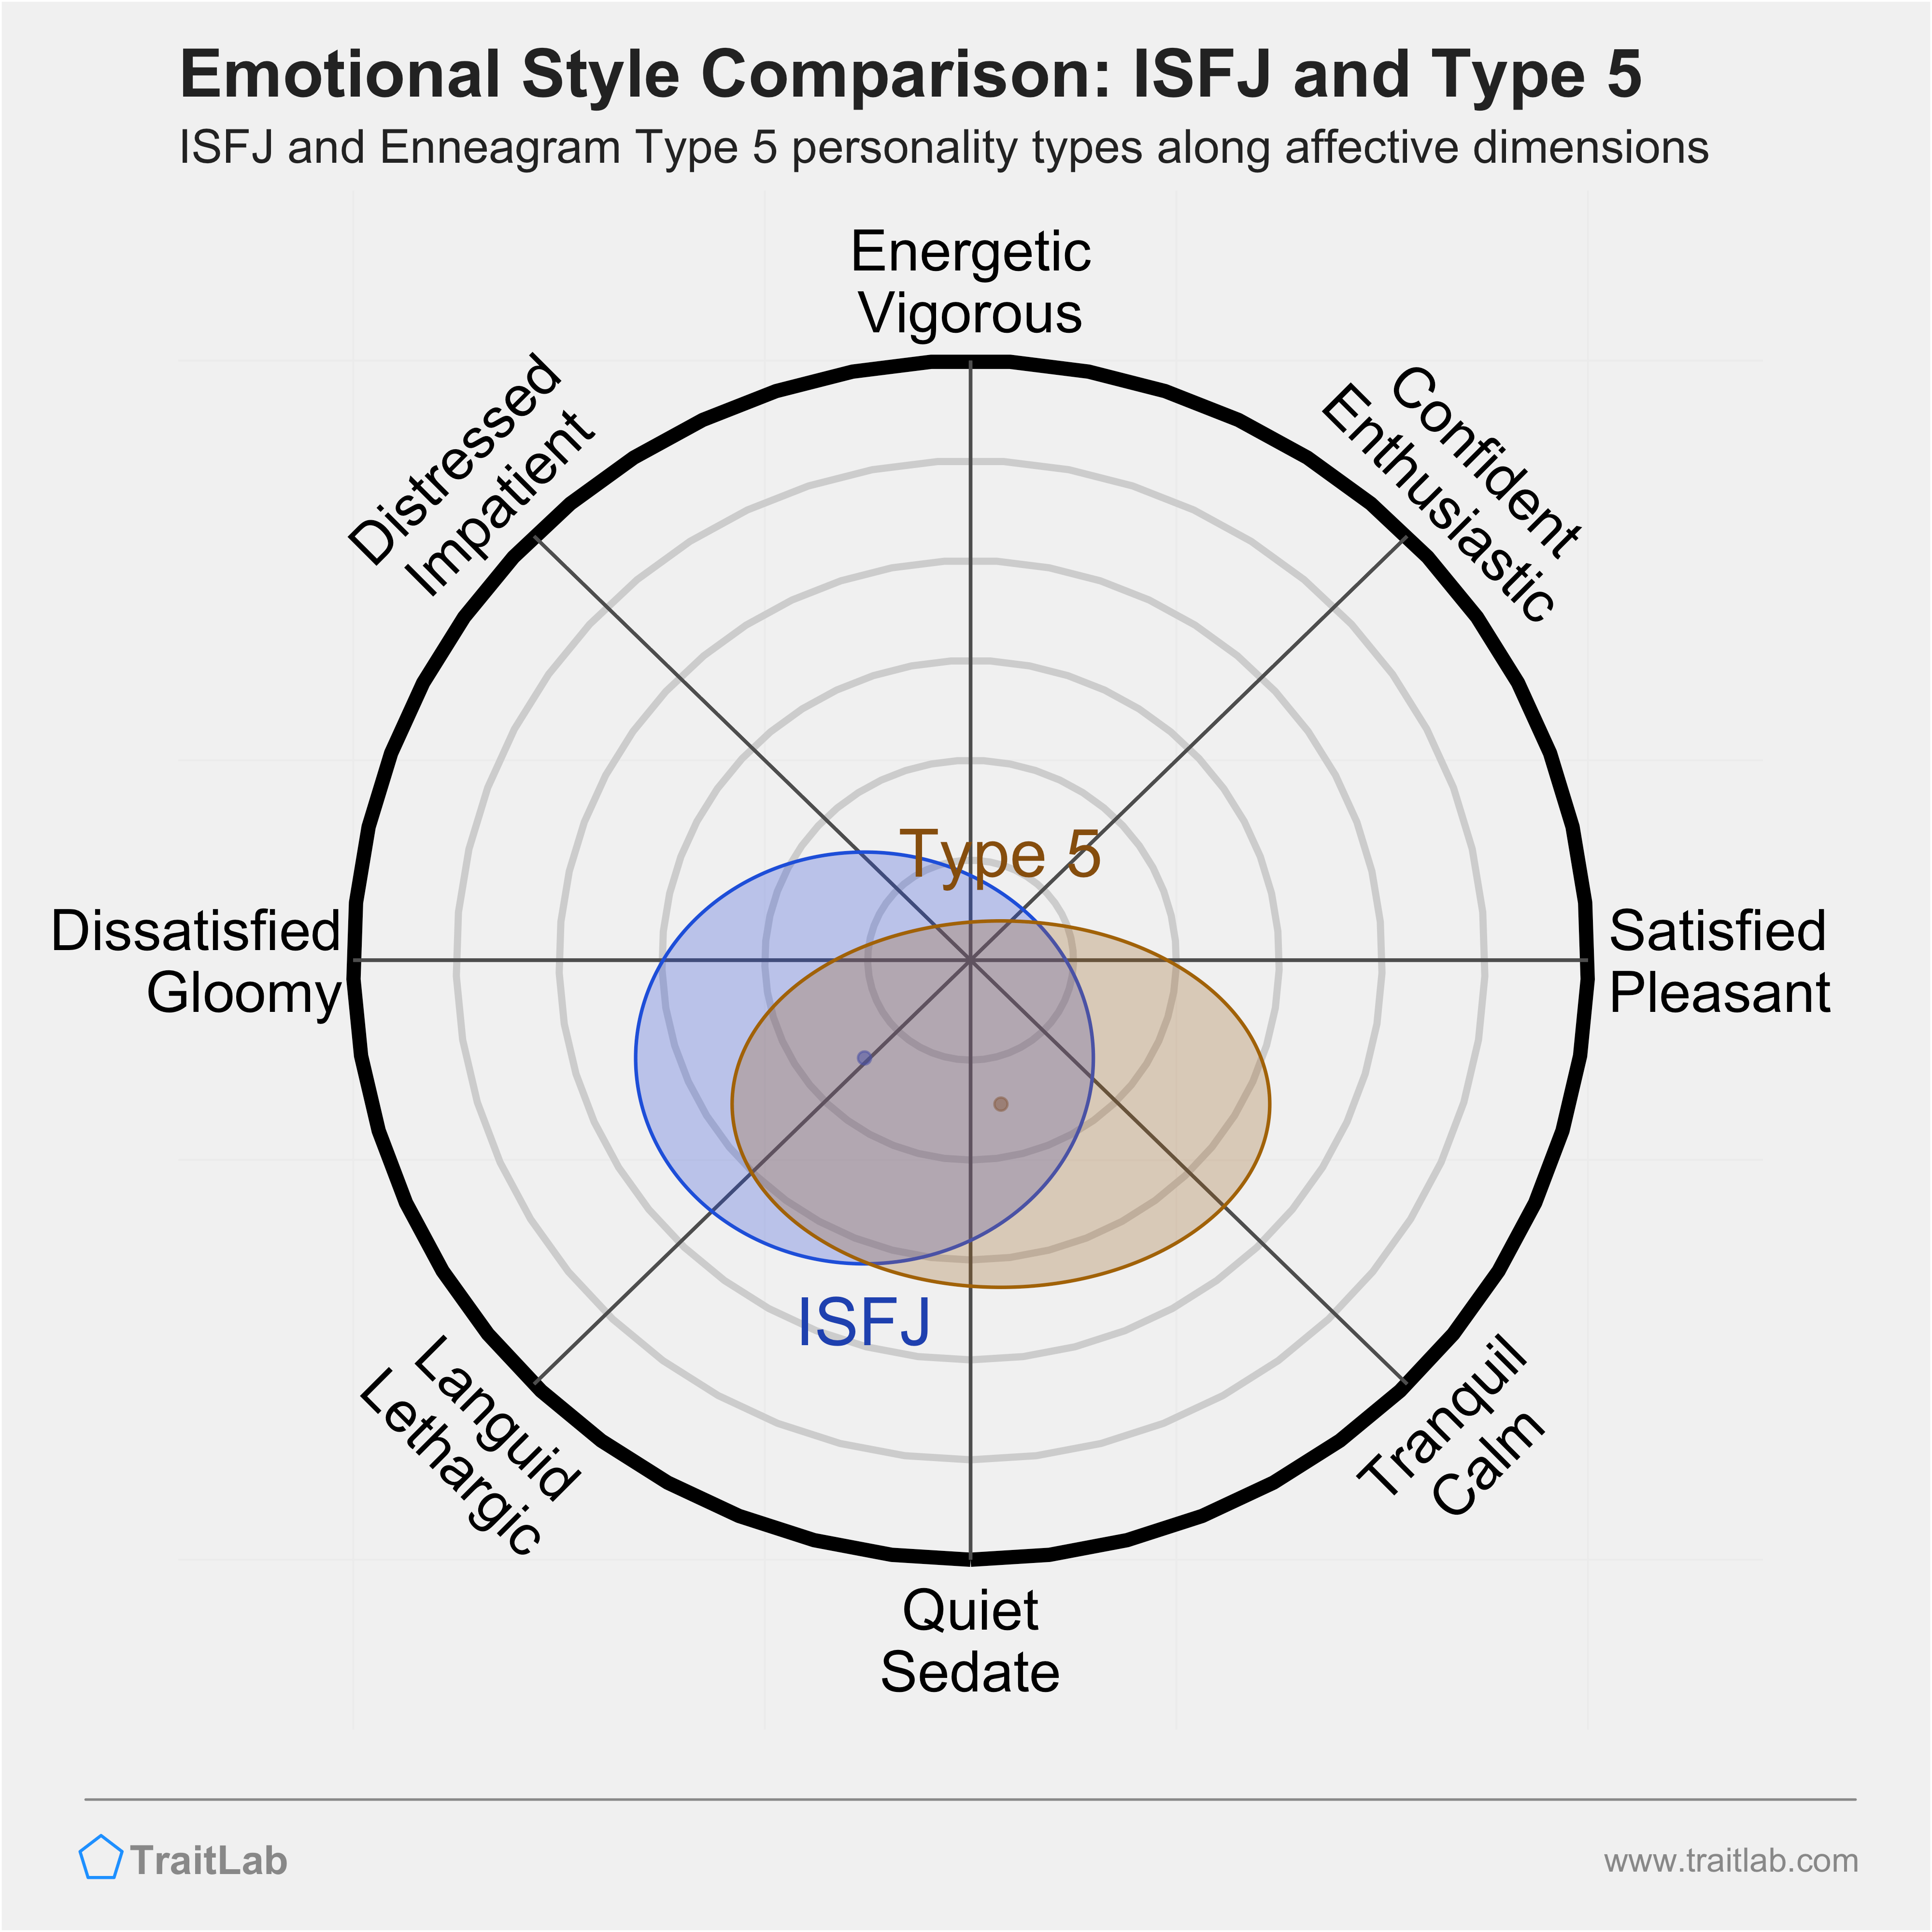 ISFJ and Type 5 comparison across emotional (affective) dimensions